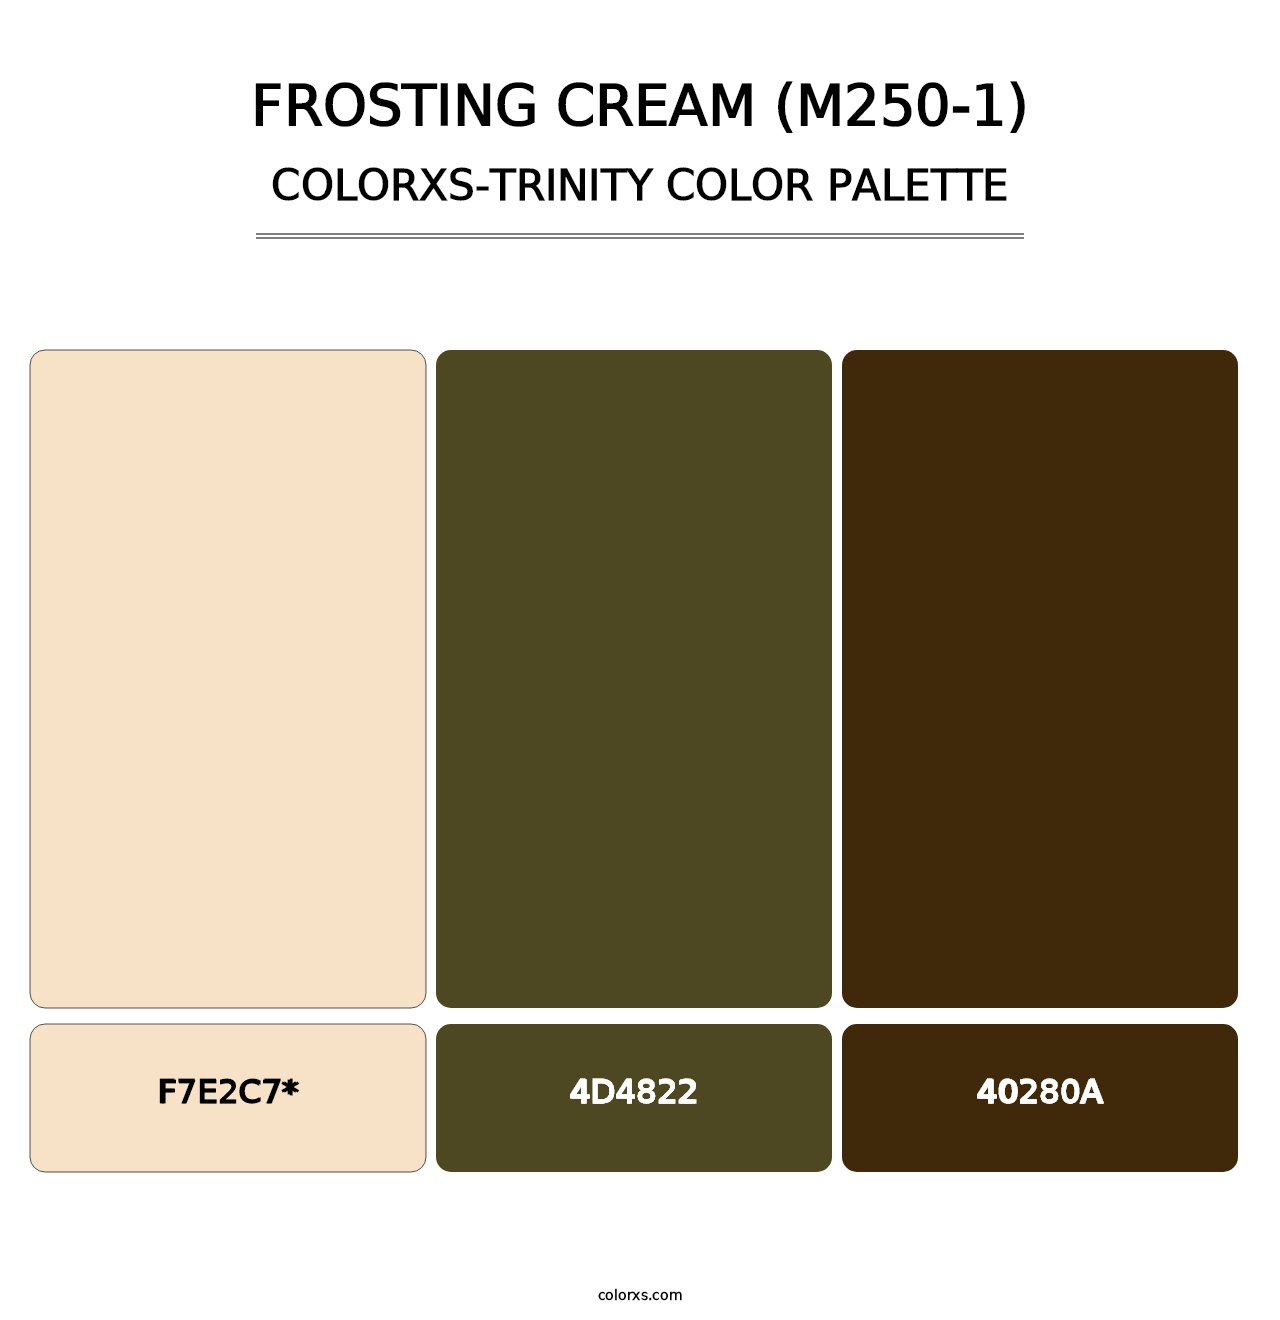 Frosting Cream (M250-1) - Colorxs Trinity Palette